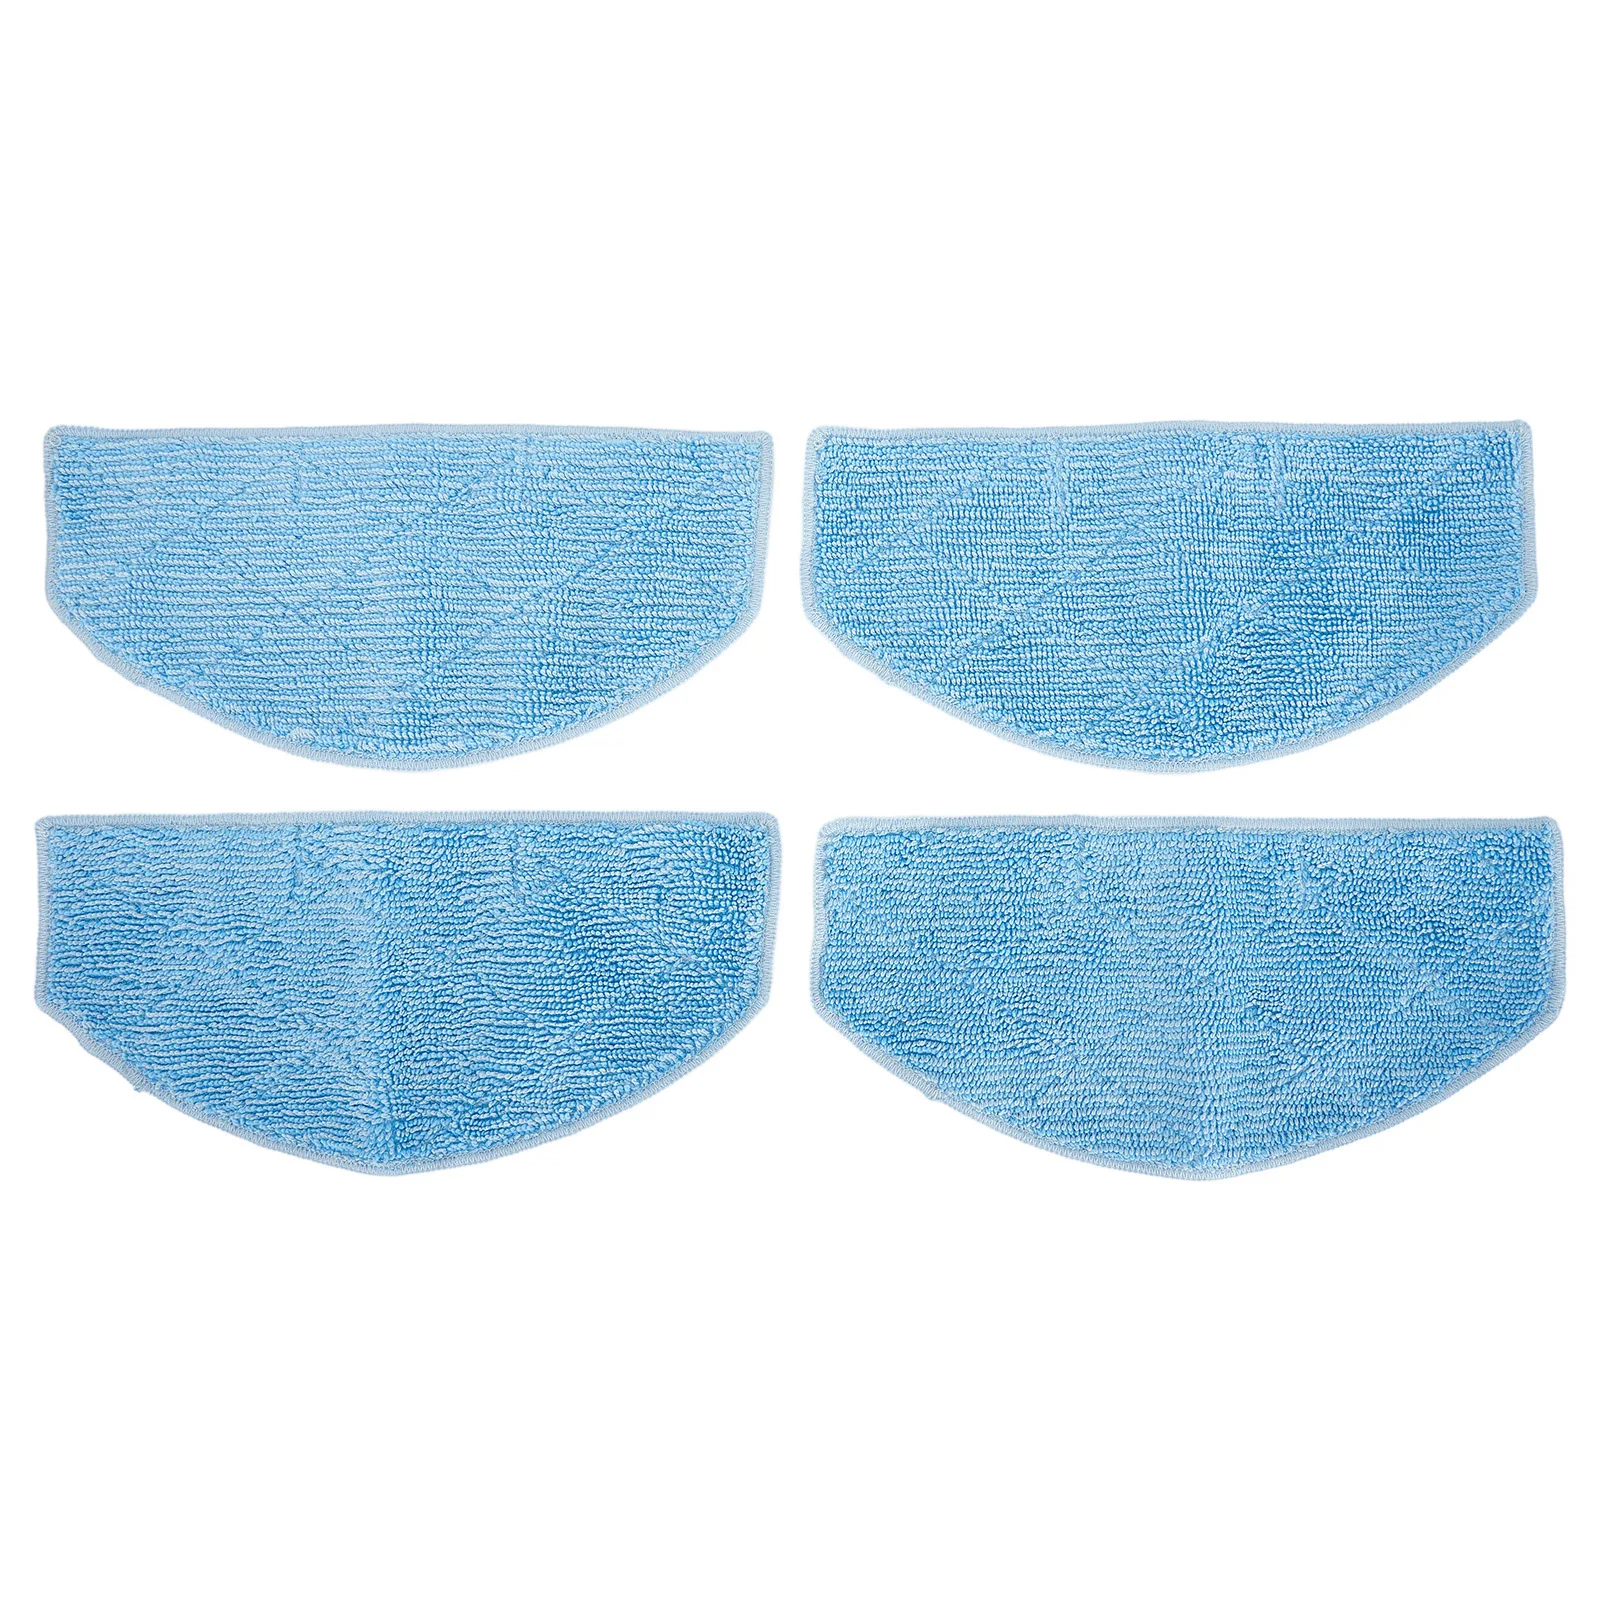 

4/10pcs Mop Cloth Pads For Tikom G8000 Pro Honiture G20 Robot Vacuum Cleaner Accessories Household Tool Spare Parts Replacement